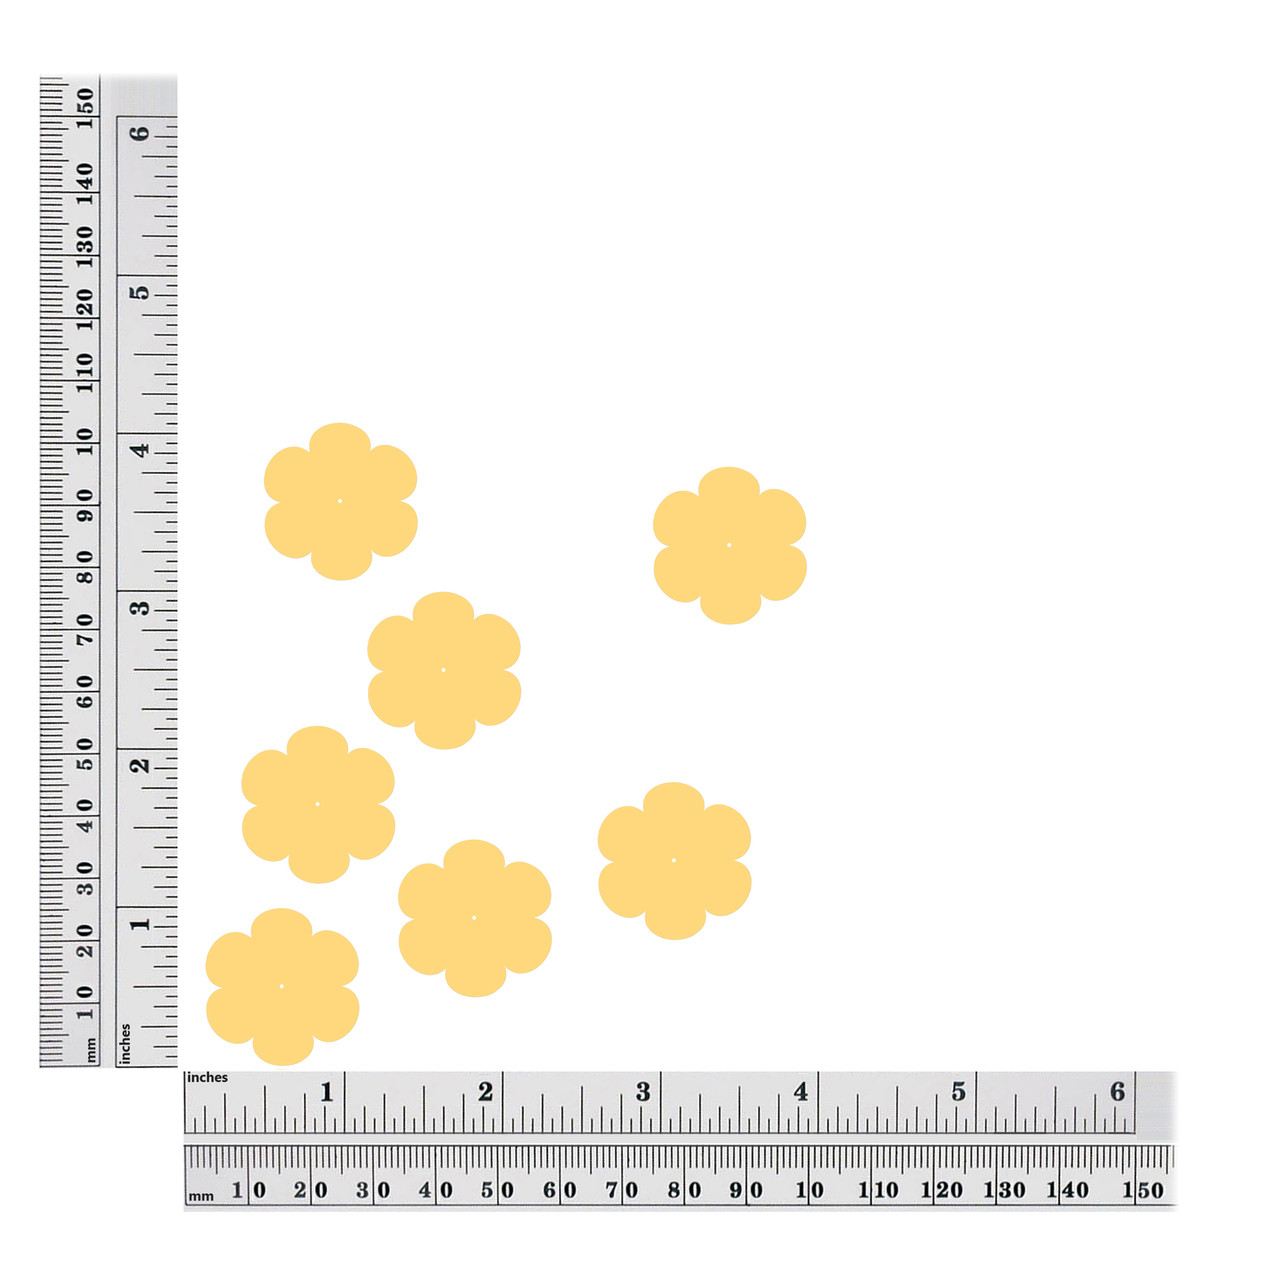 1-inch-flower-sequins size chart